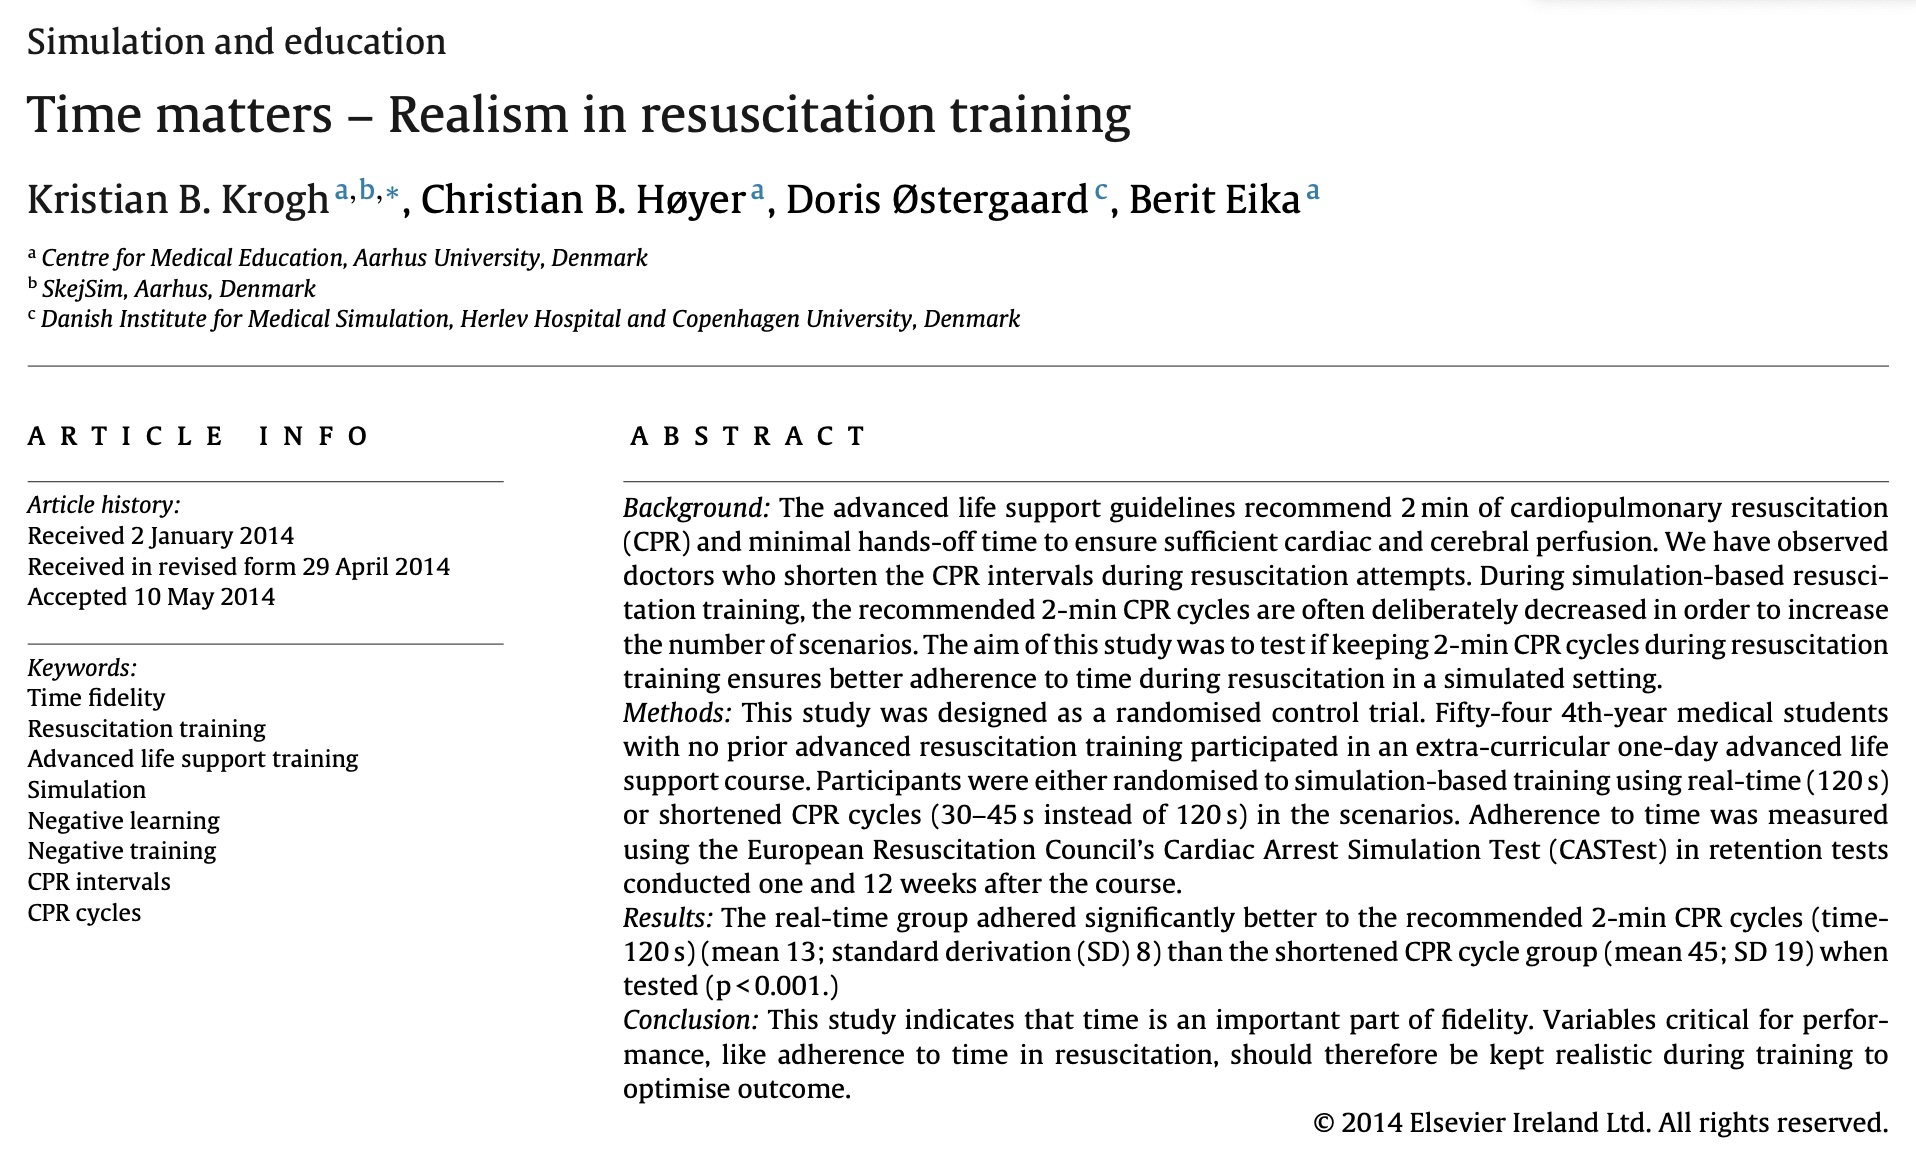 Time matters – Realism in resuscitation training